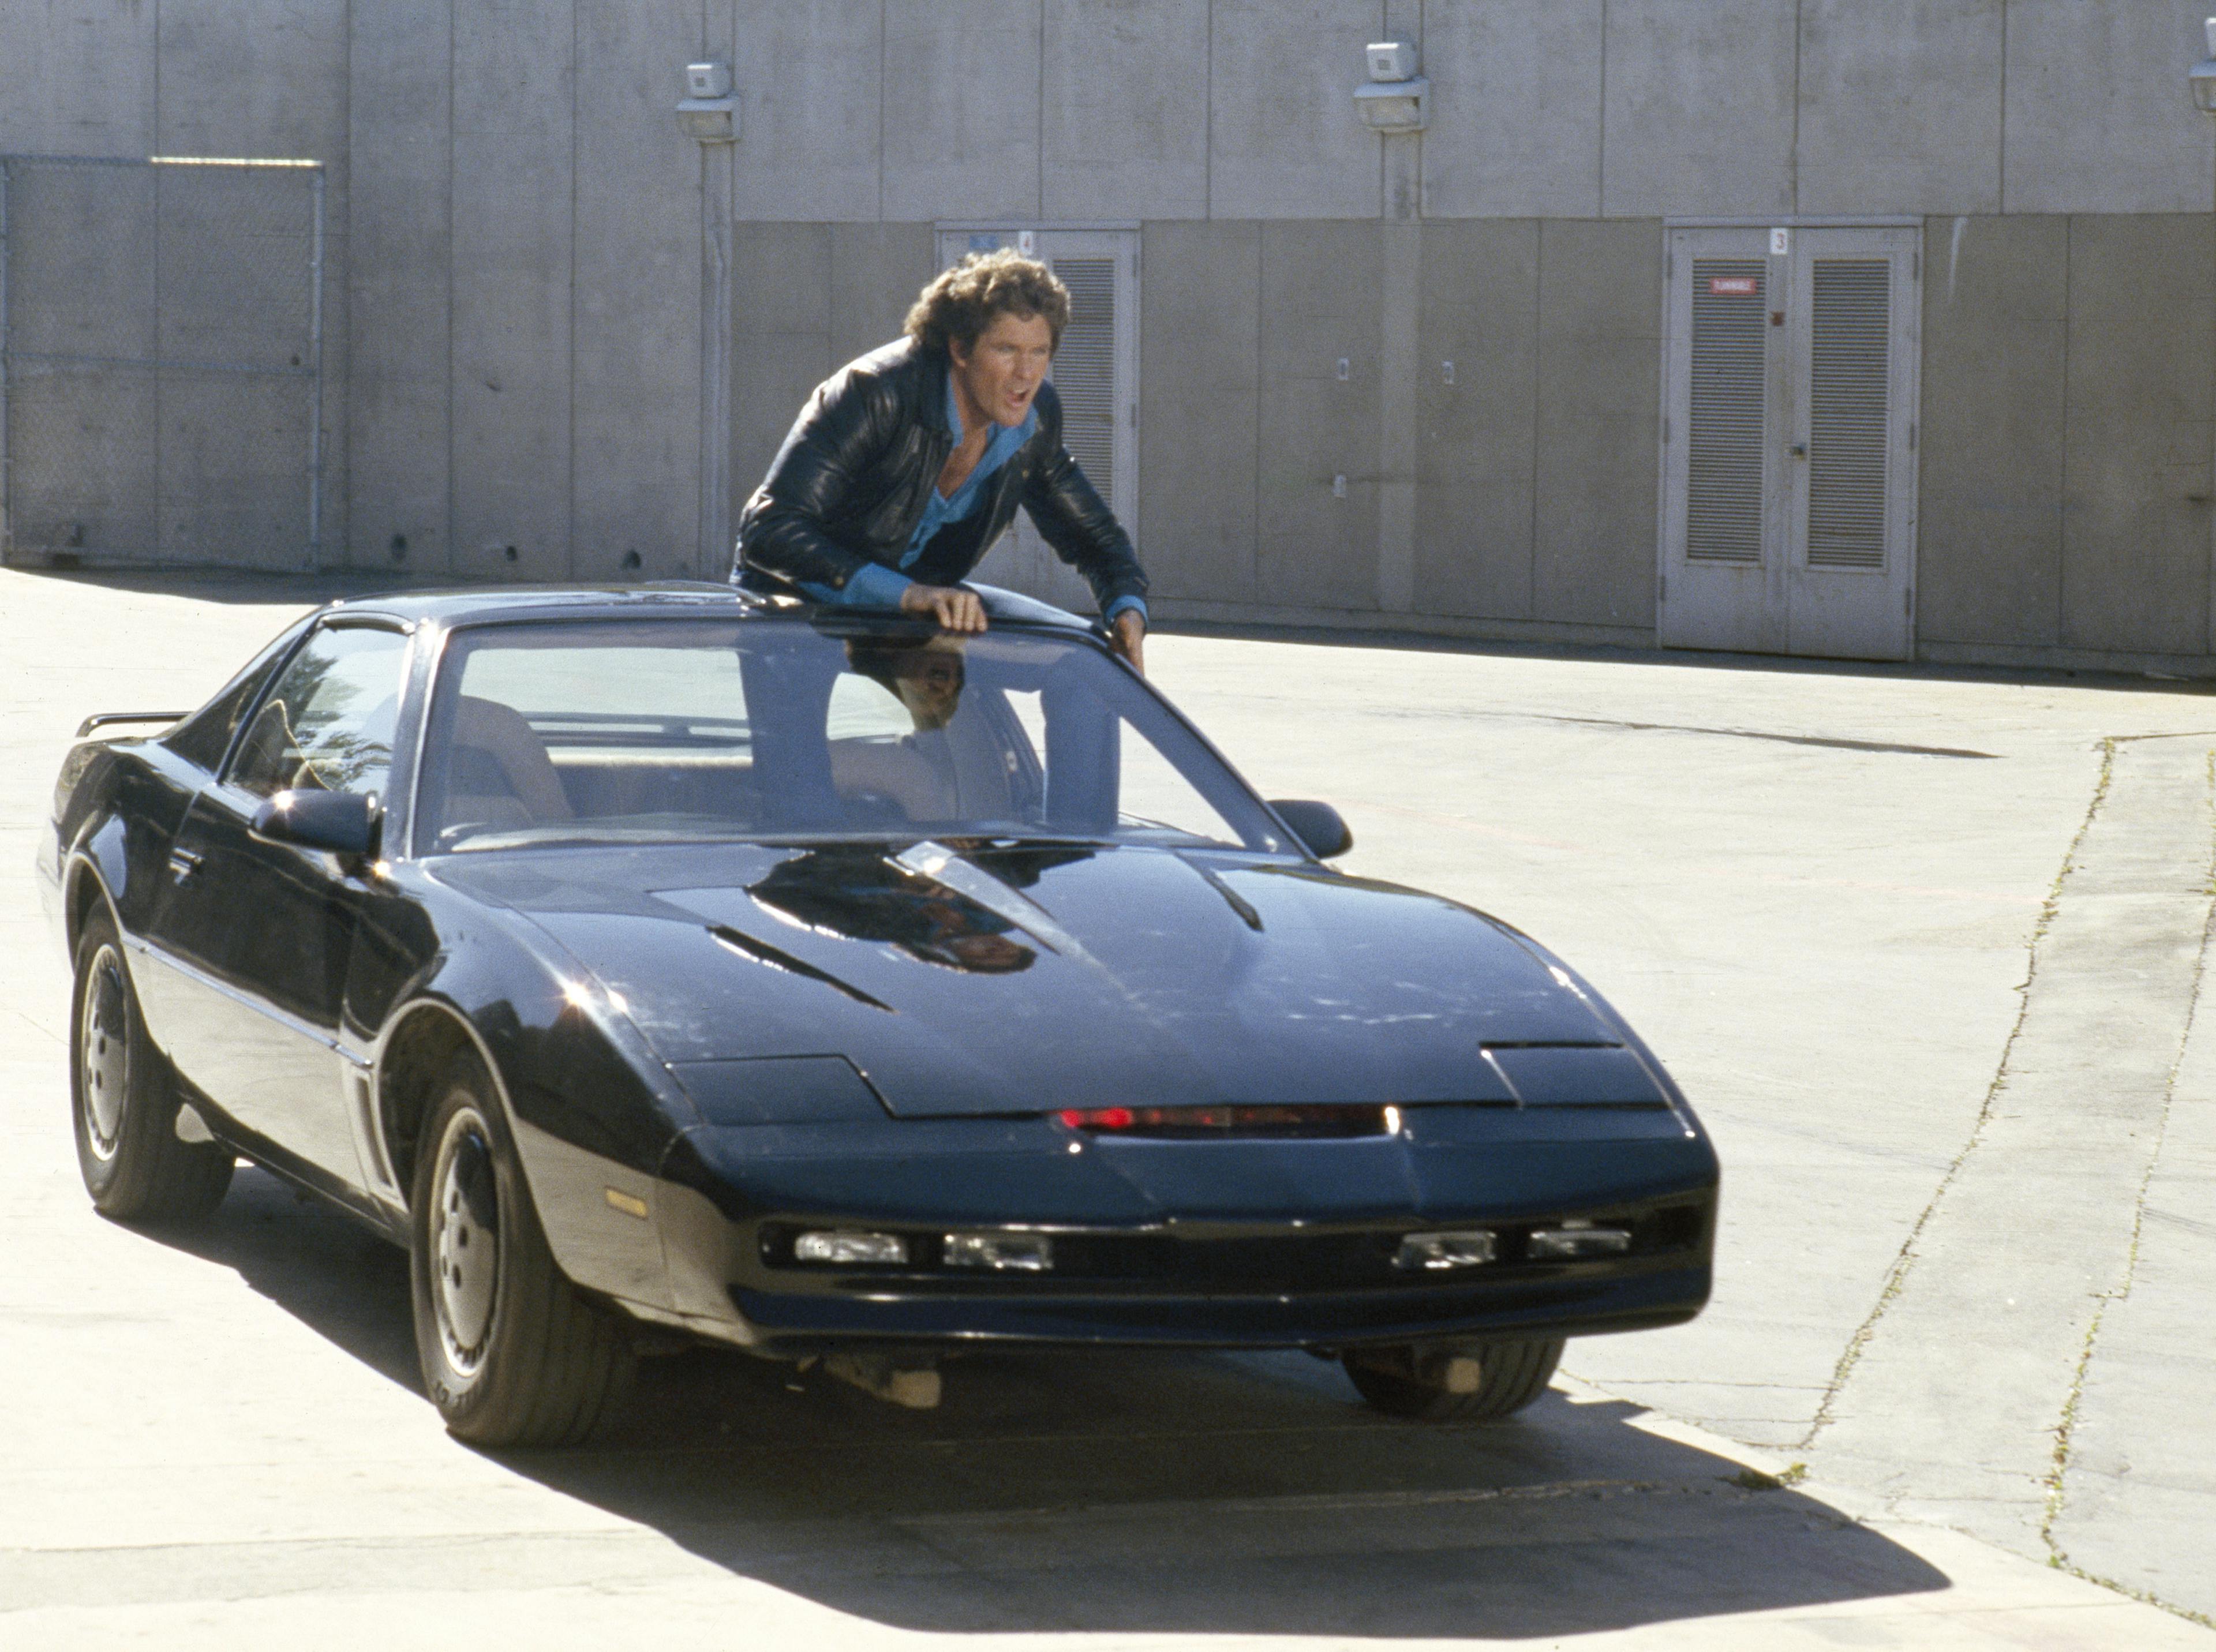 For those who are too young, look up Knight Rider, it will all make sense.